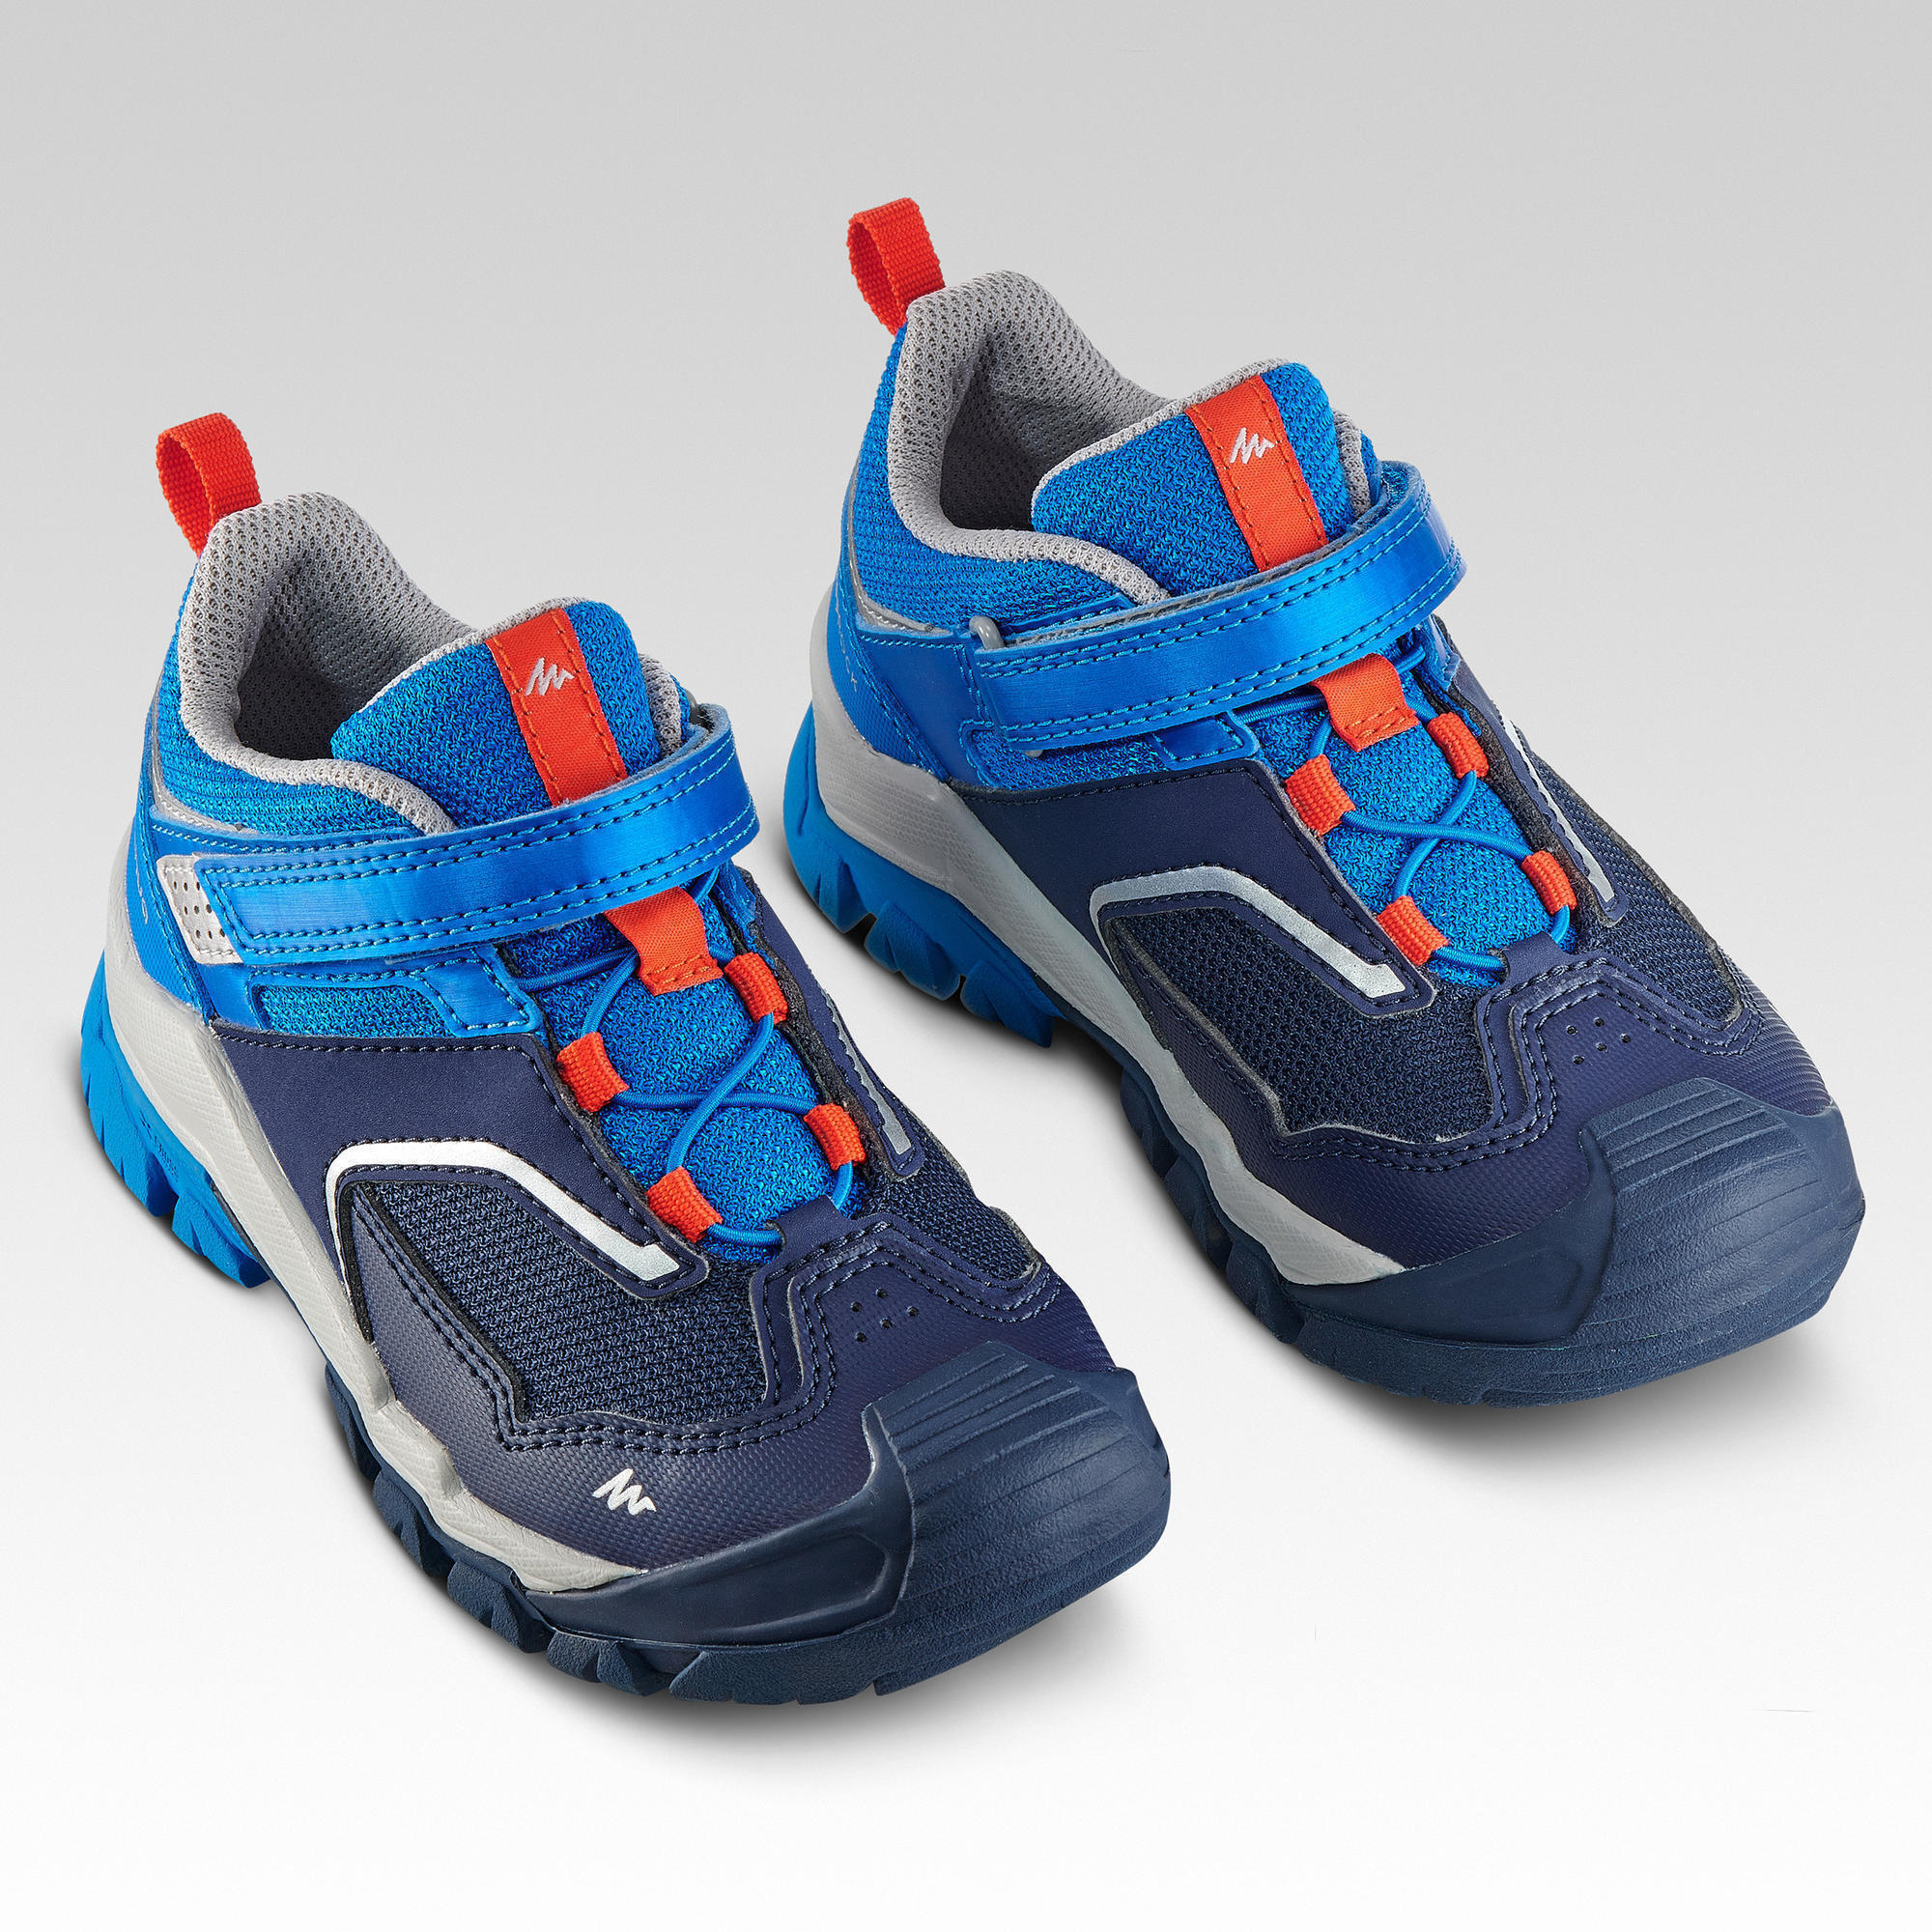 Child's Low Walking Shoes - Navy Blue 4/7